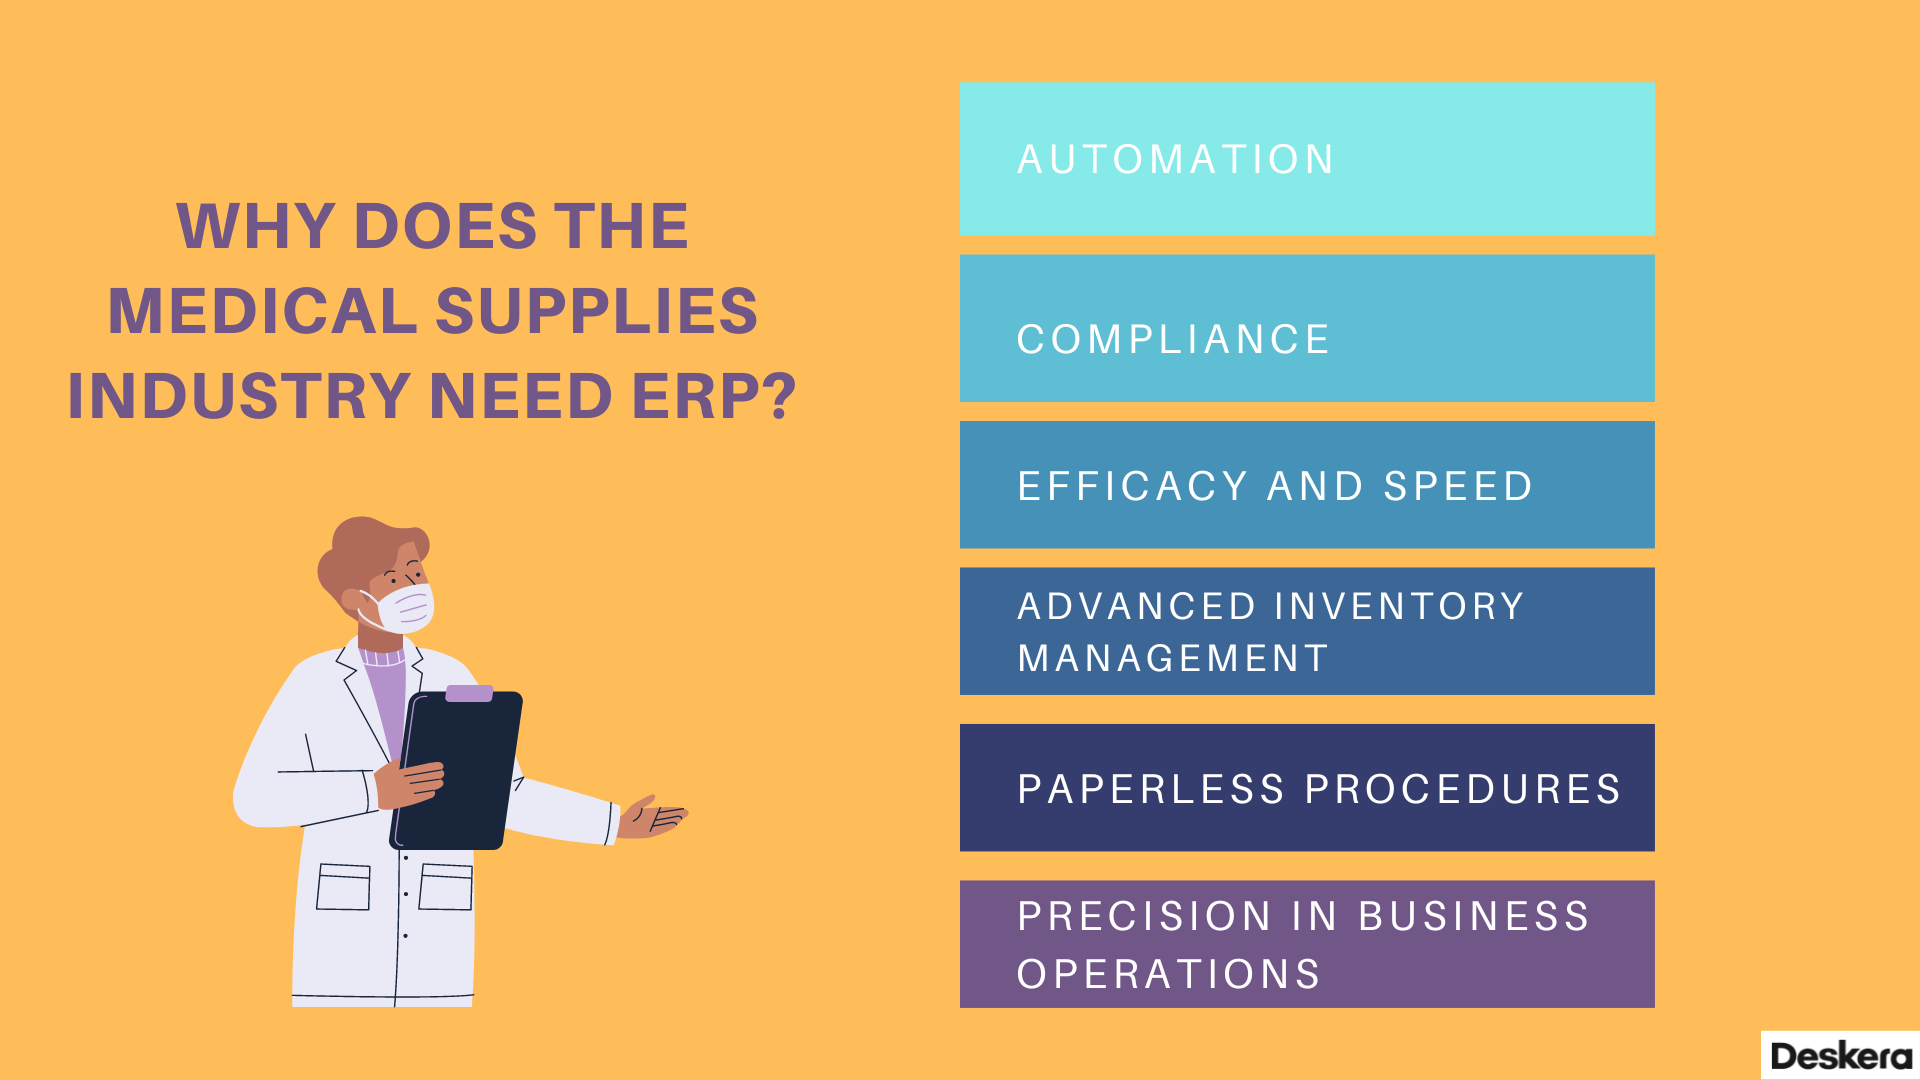 Why does the Medical Supplies Industry need ERP?